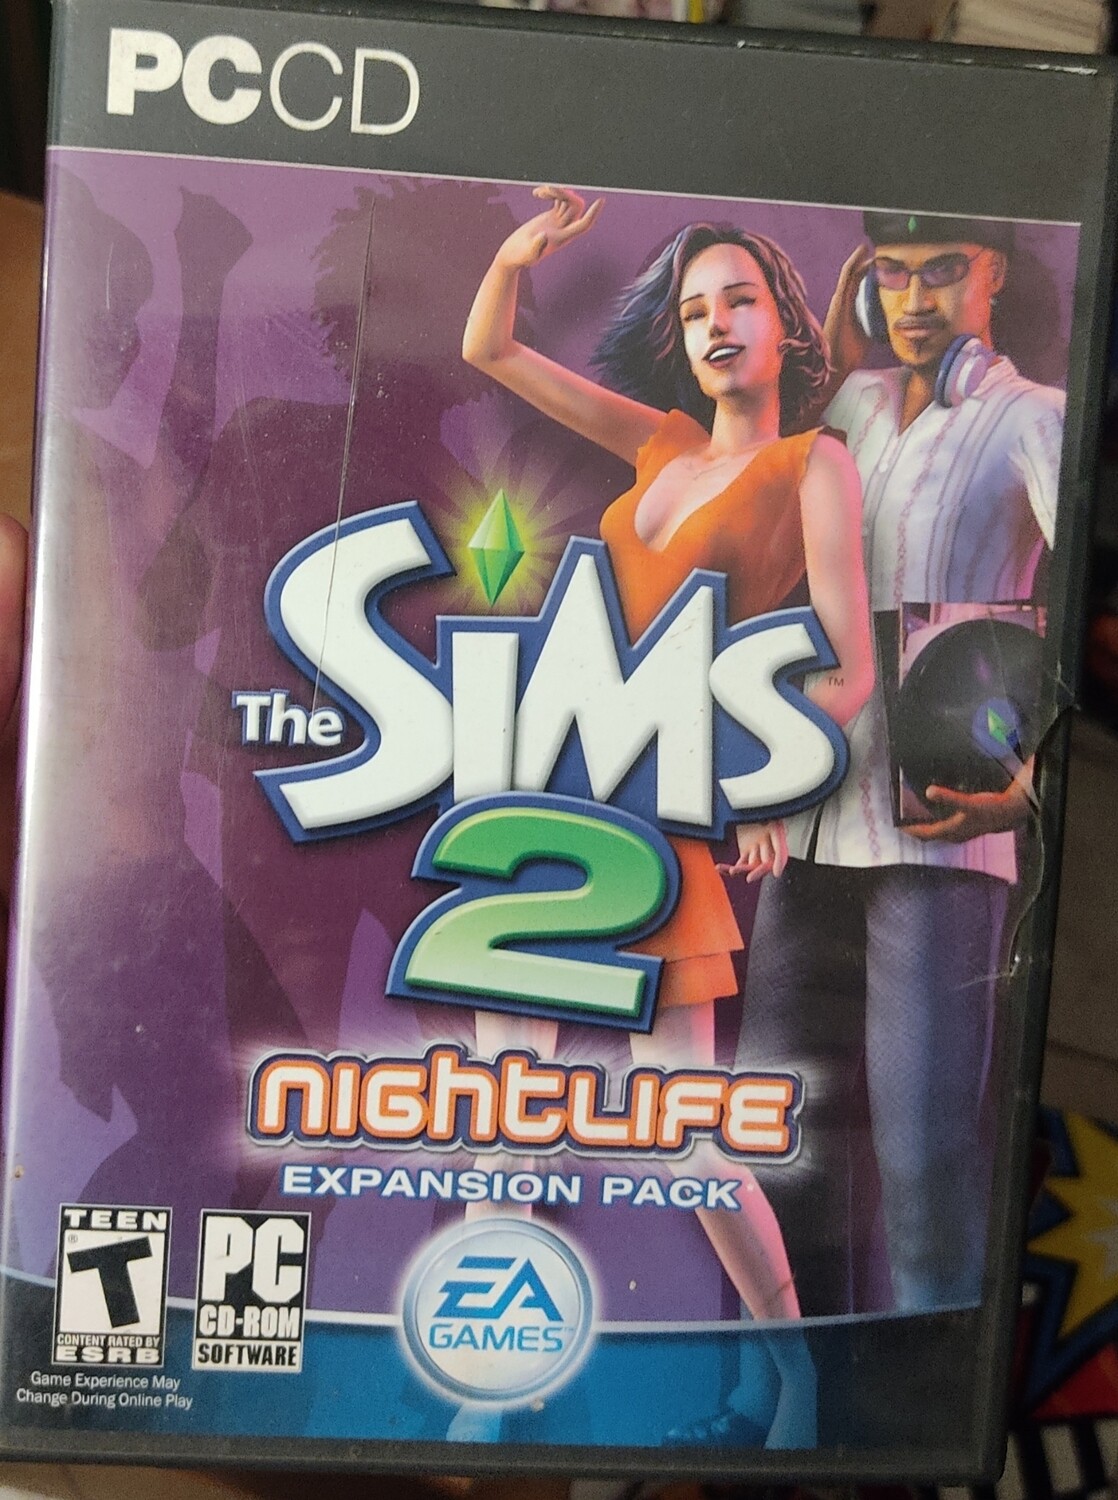 BA The Sims 2 Nightlife Expansio Pack PC Game